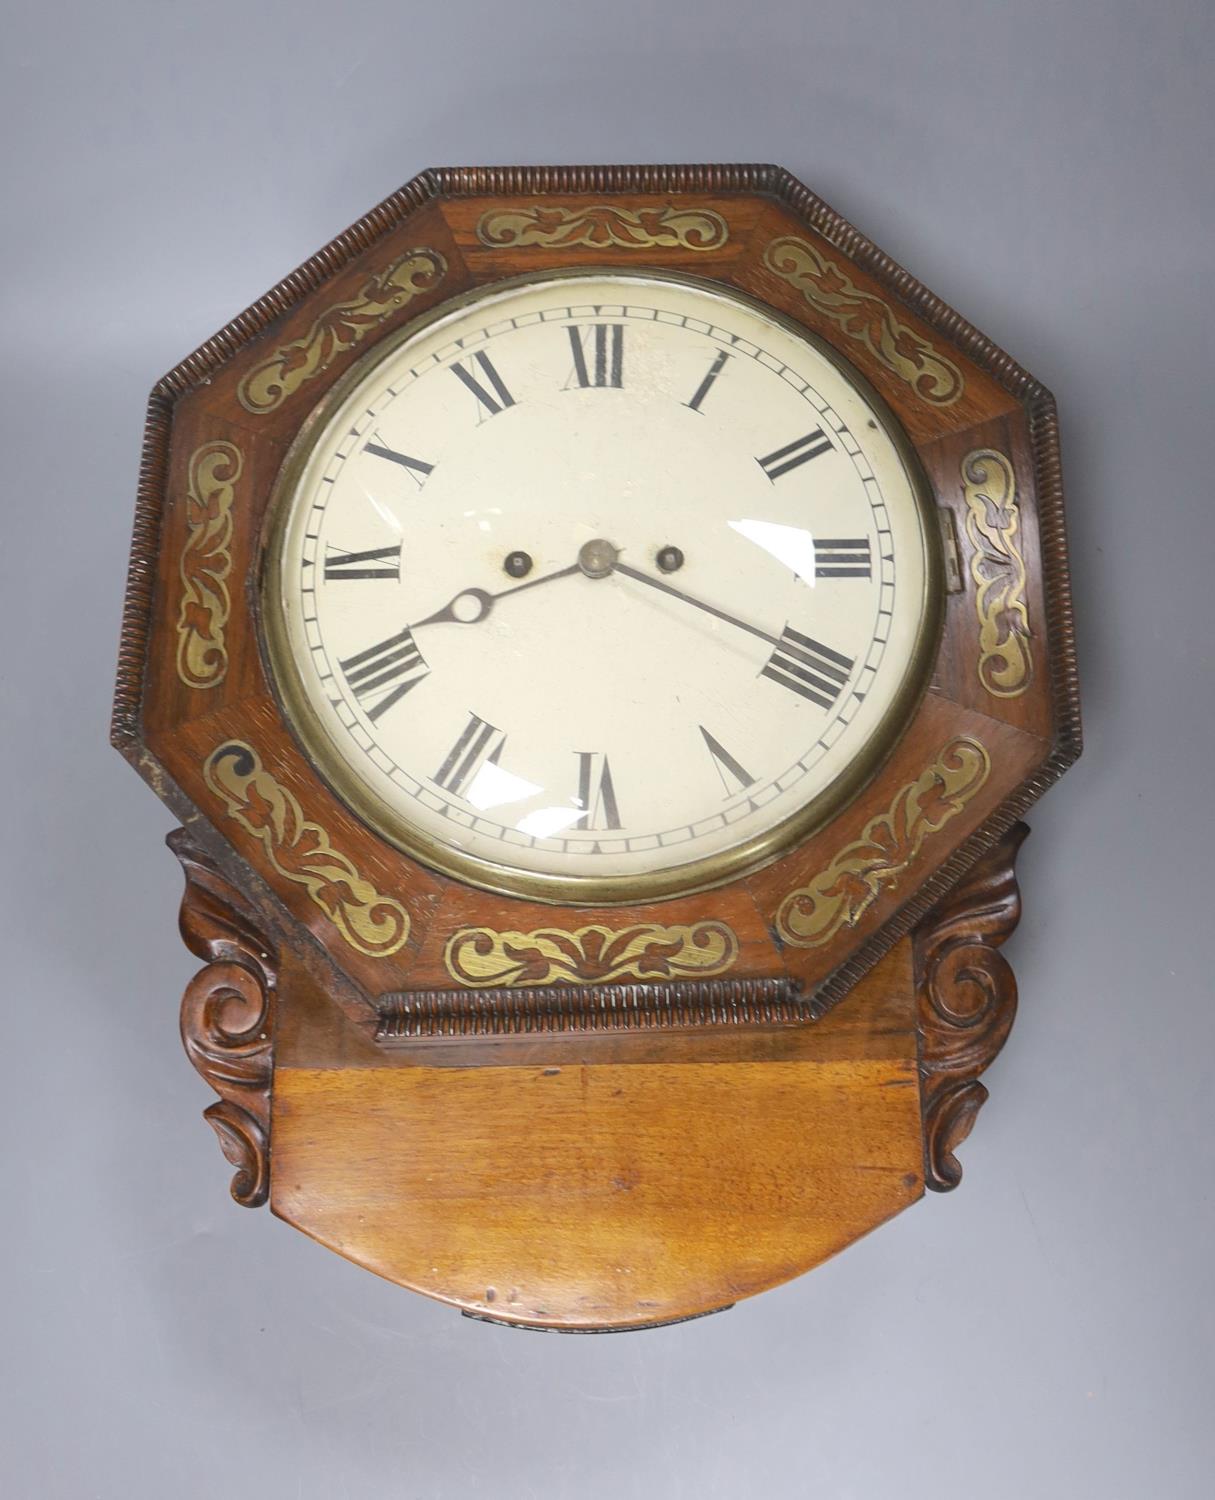 A 19th century rosewood and cut brass cased wall clock, with a 9" dial painted with black Roman